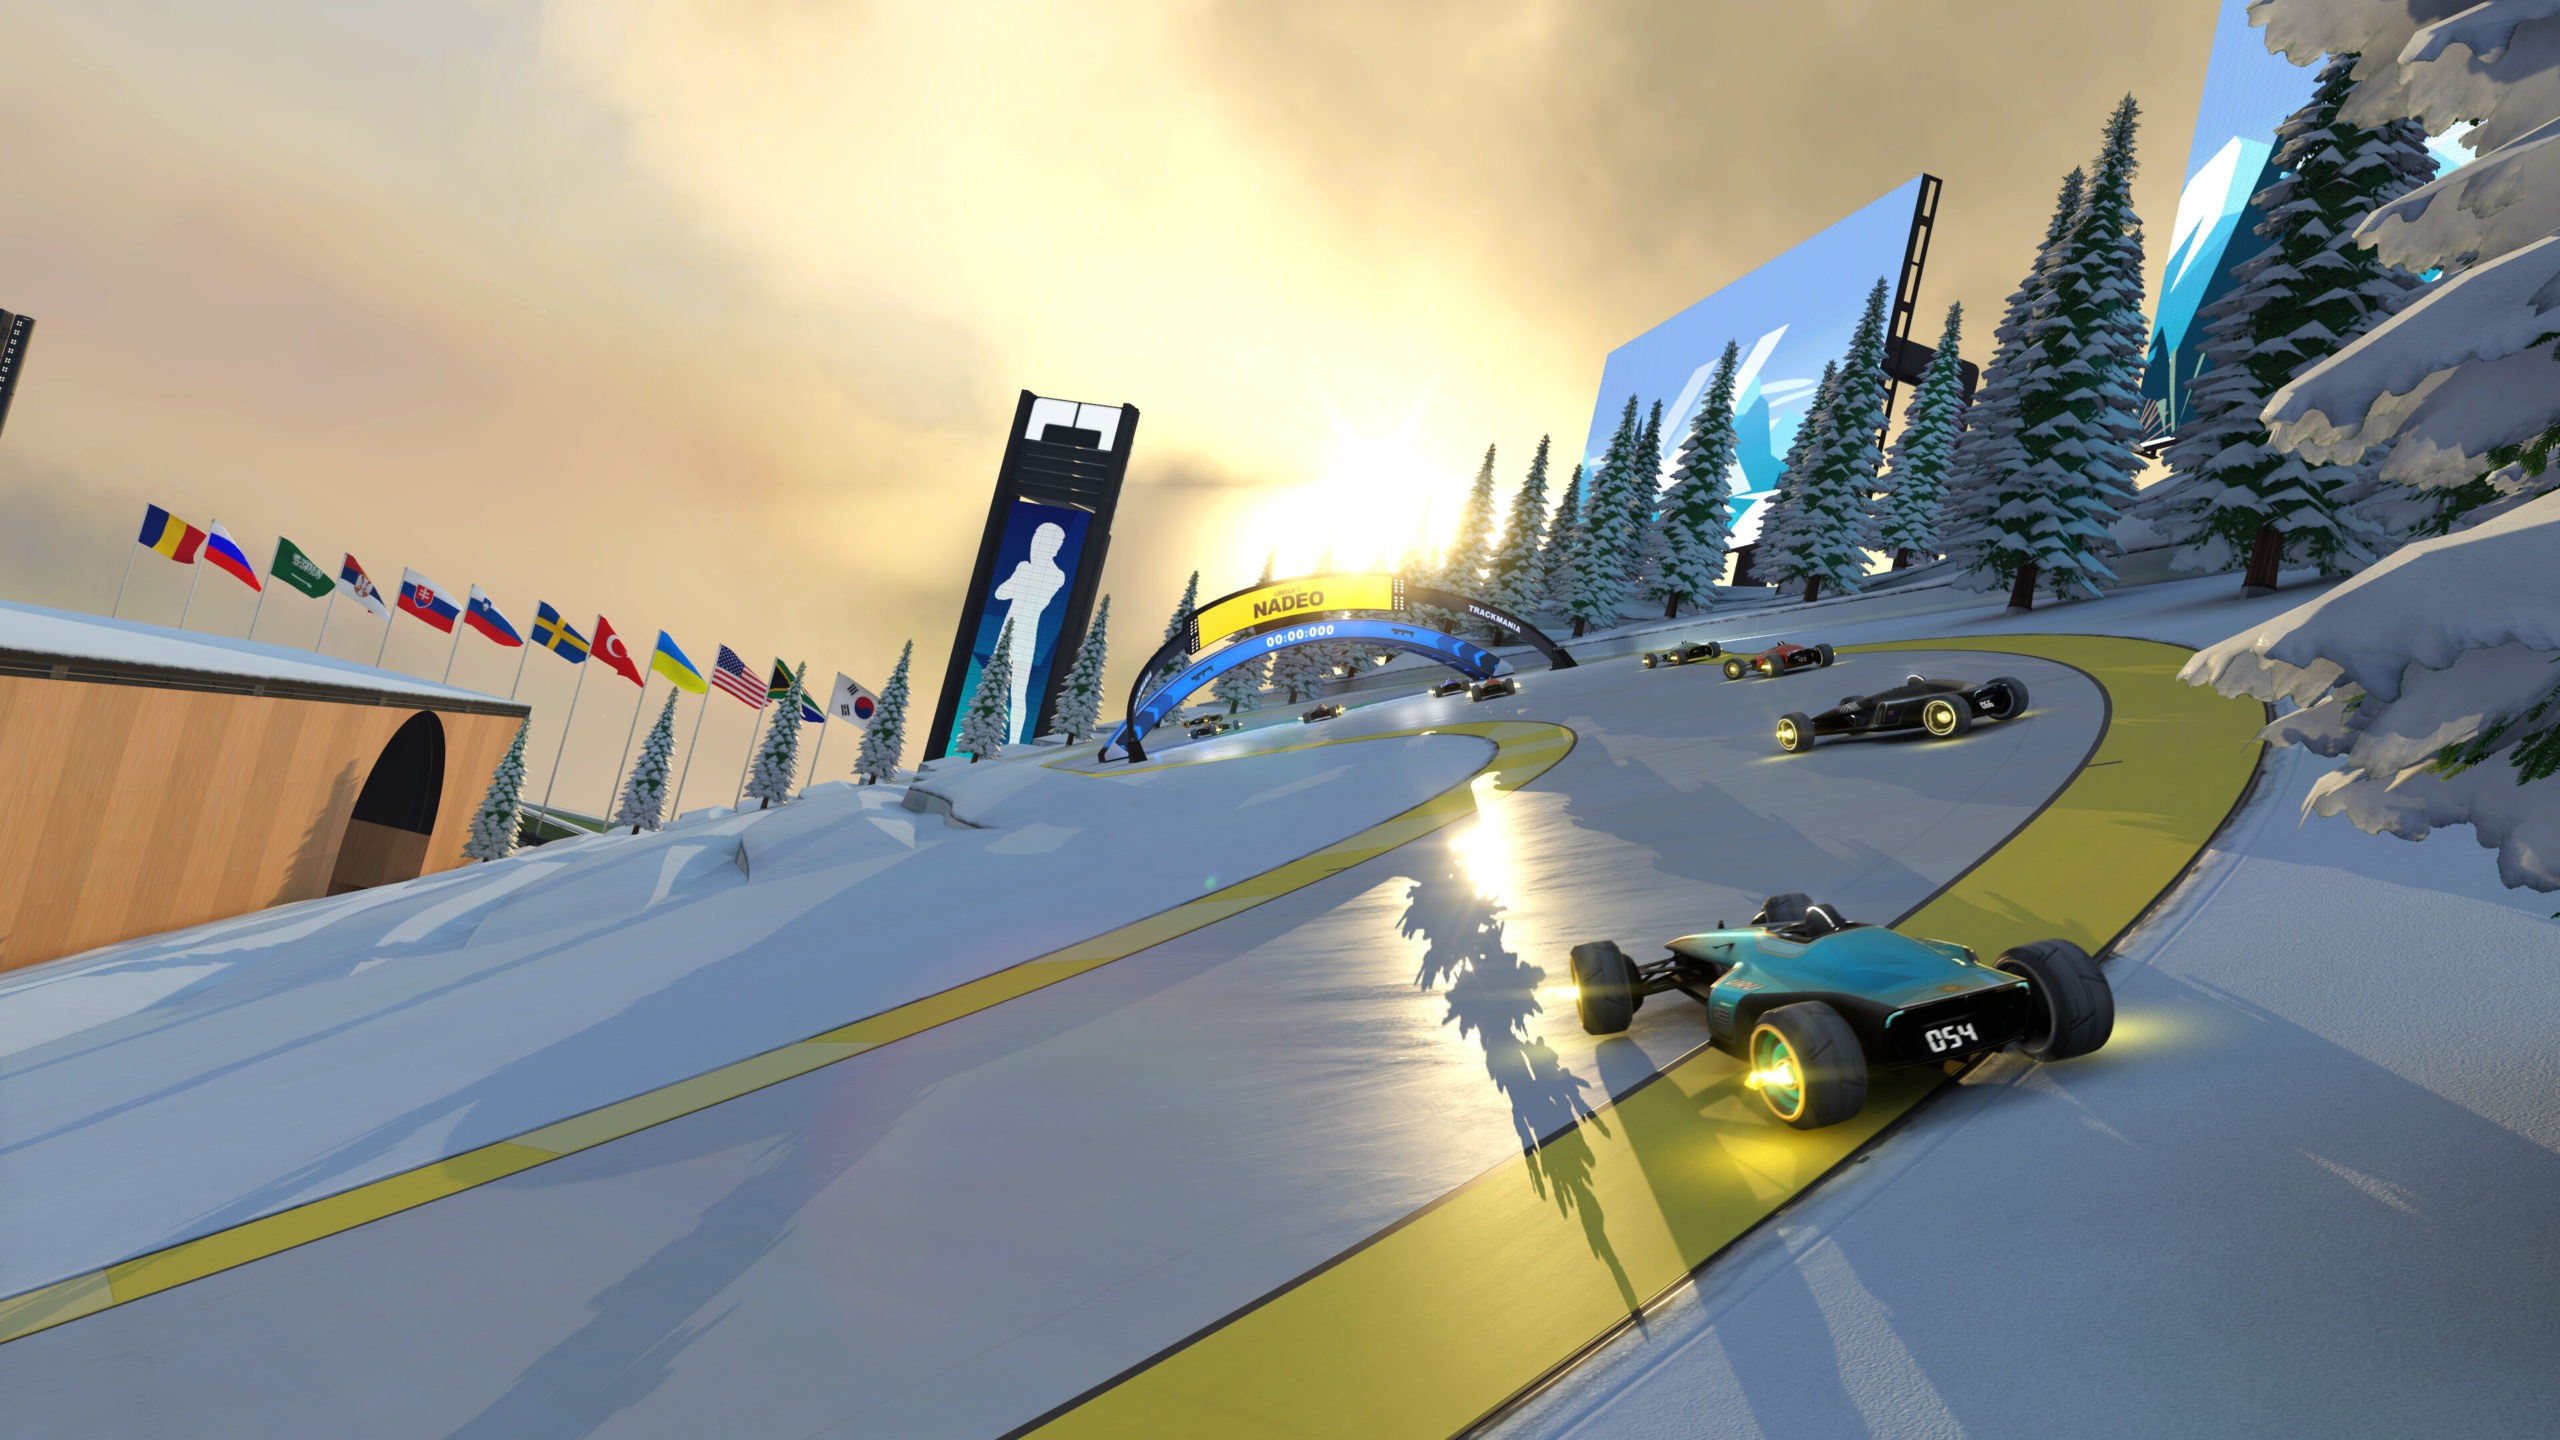 Trackmania’s Fall Campaign Brings 25 New Tracks, 100 New Medals and